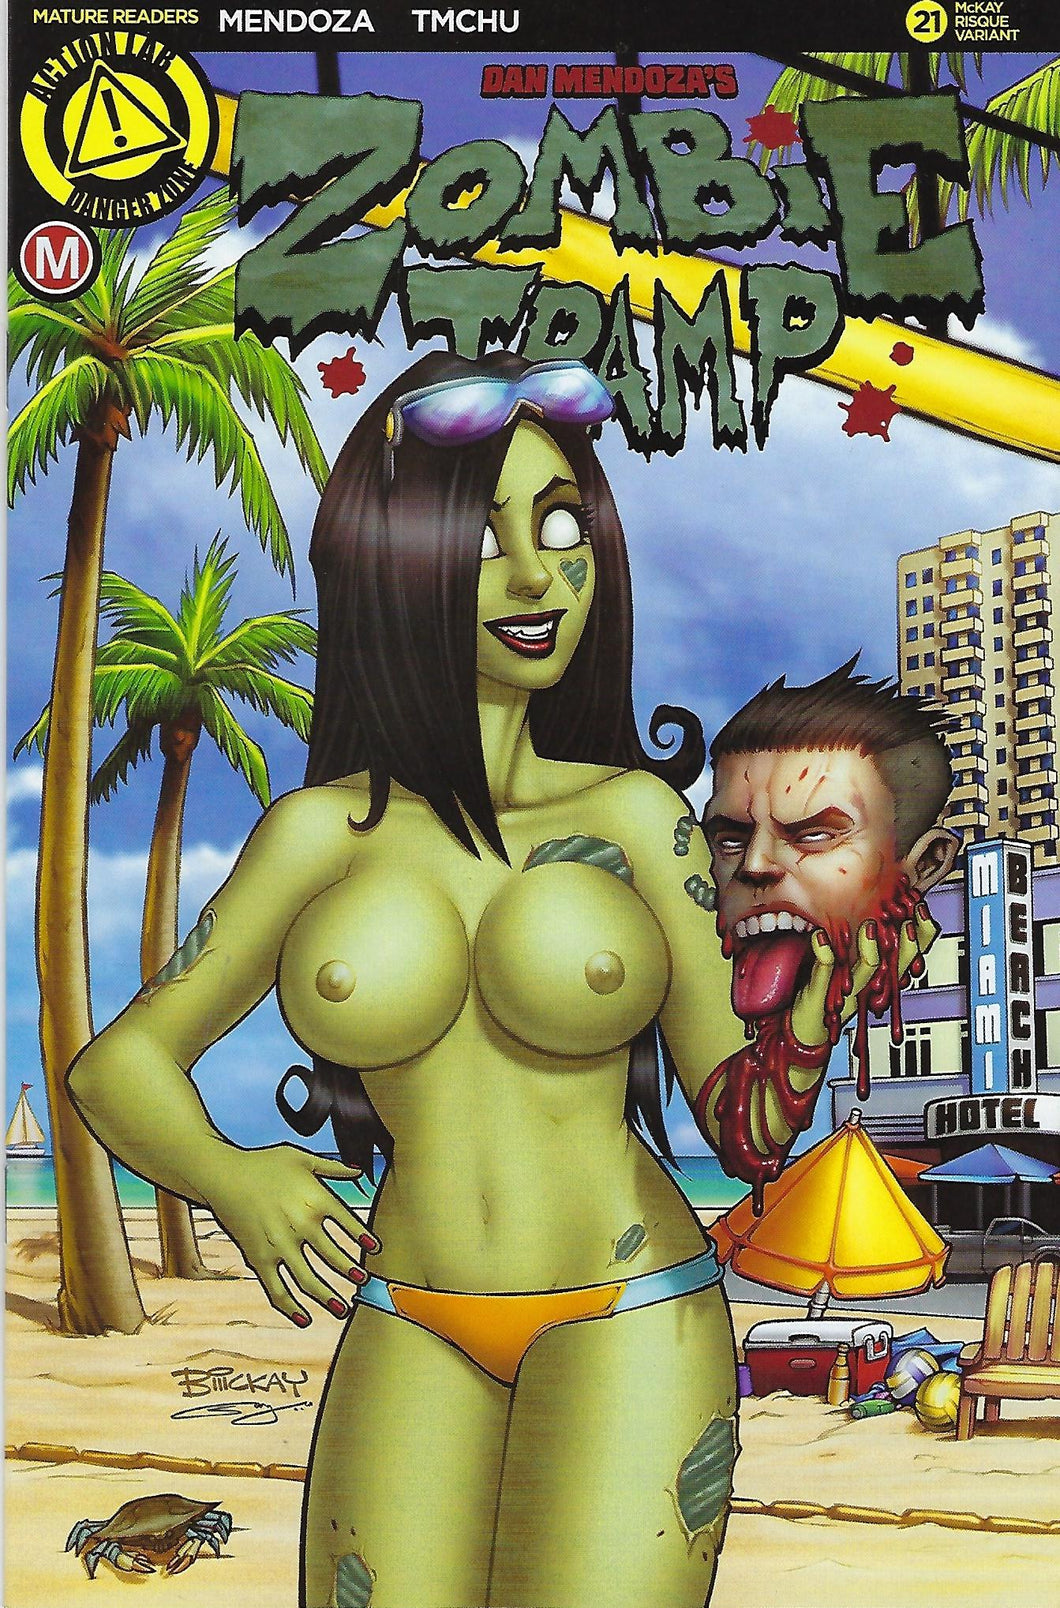 Zombie Tramp # 21 Bill McKay Sexy Risque / Topless Variant Edition Cover !!!   NM